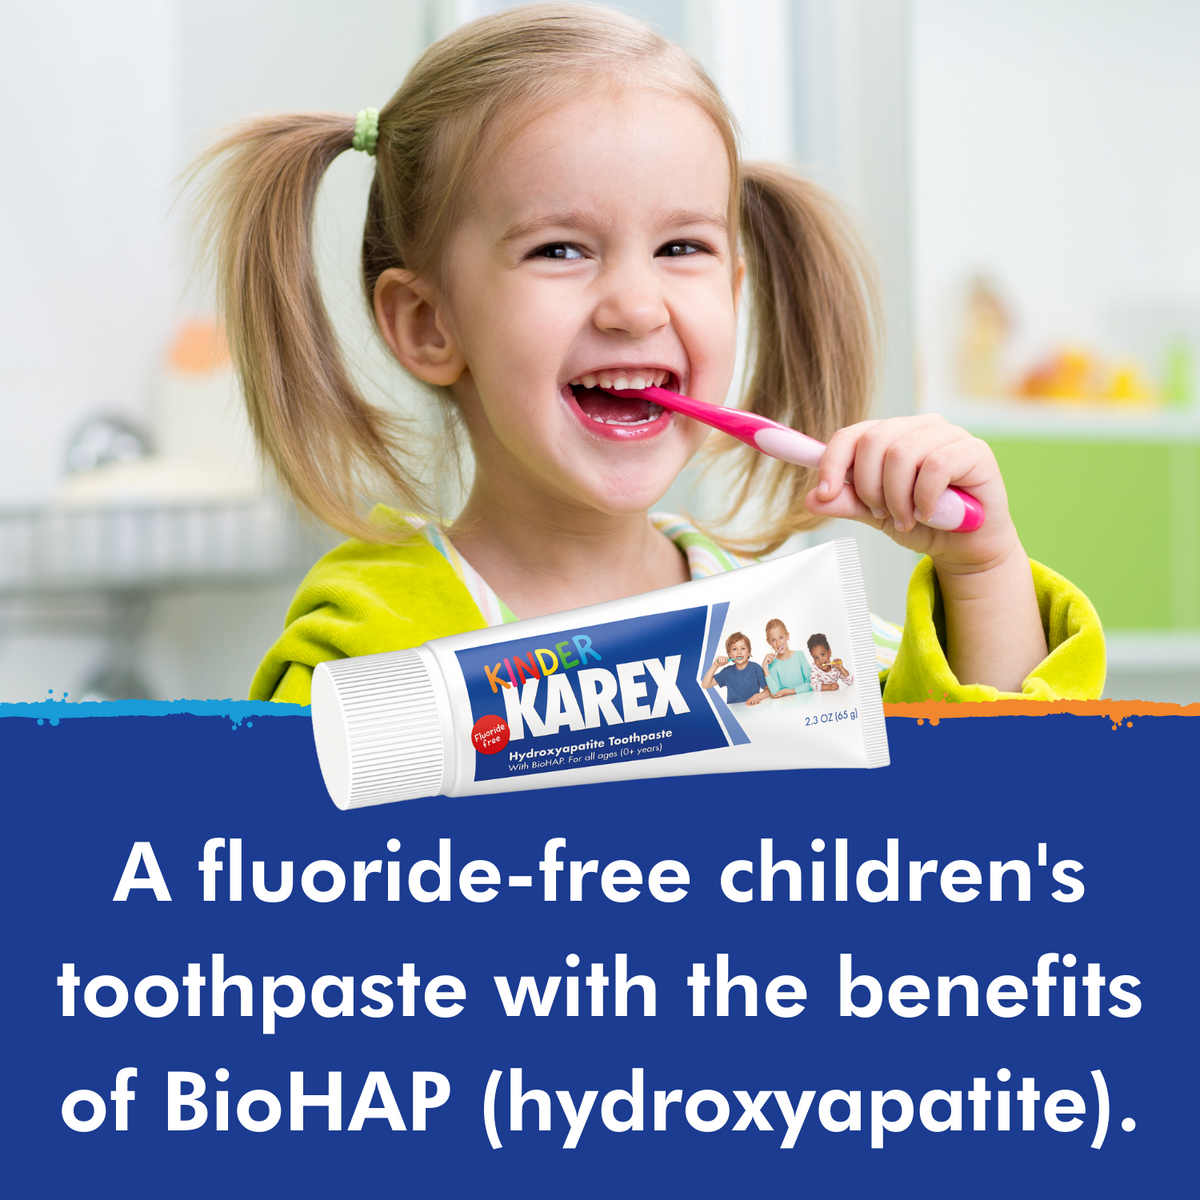 A fluoride-free toothpaste with the benefits of BioHAP (Hydroxyapatite)